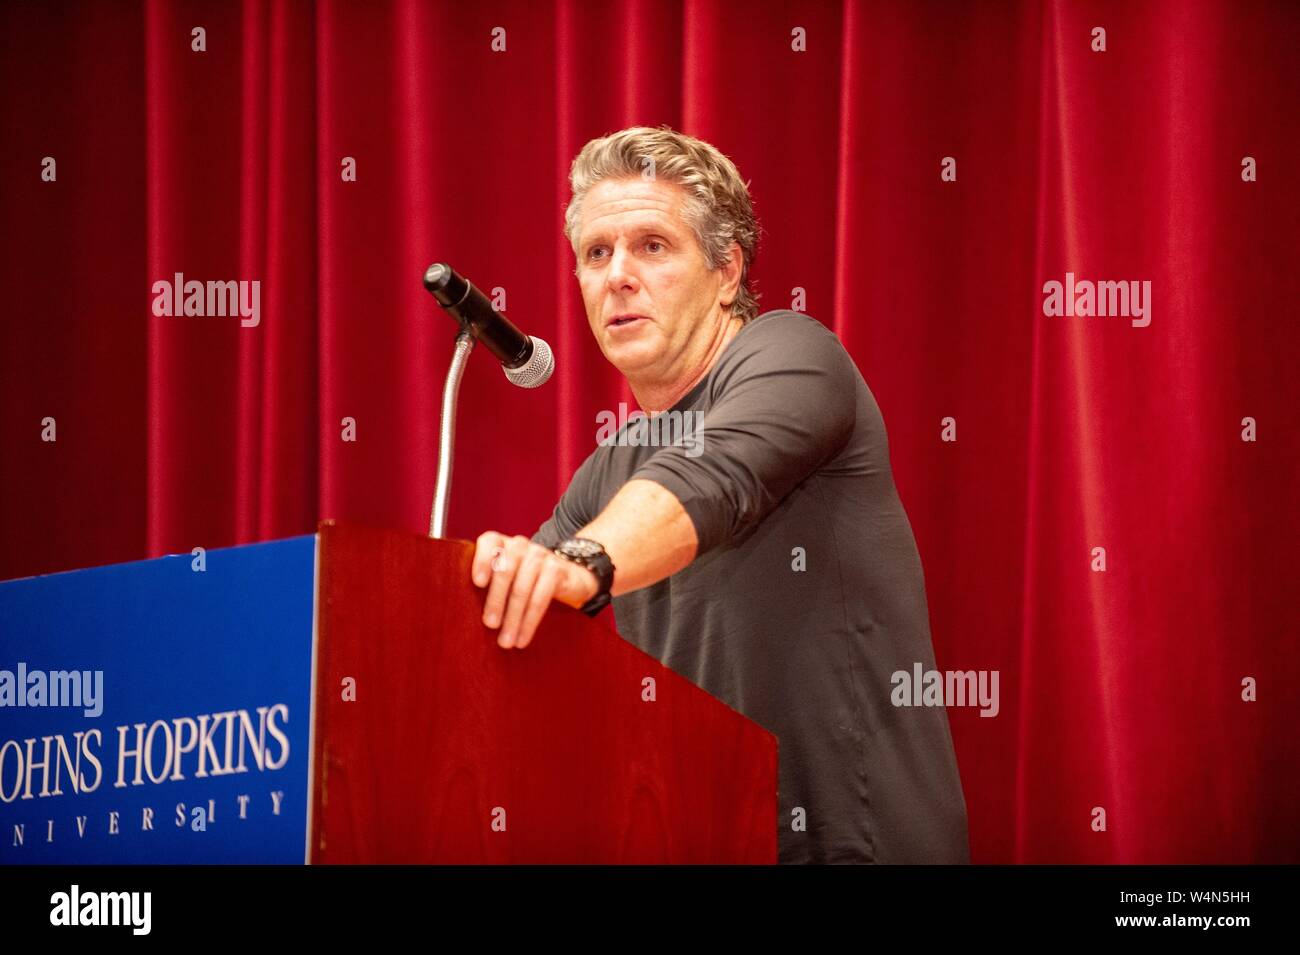 Medium shot of Donny Deutsch, marketing professional and television personality, speaking at a Milton S Eisenhower Symposium at the Johns Hopkins University, Baltimore, Maryland, November 9, 2010. From the Homewood Photography Collection. () Stock Photo